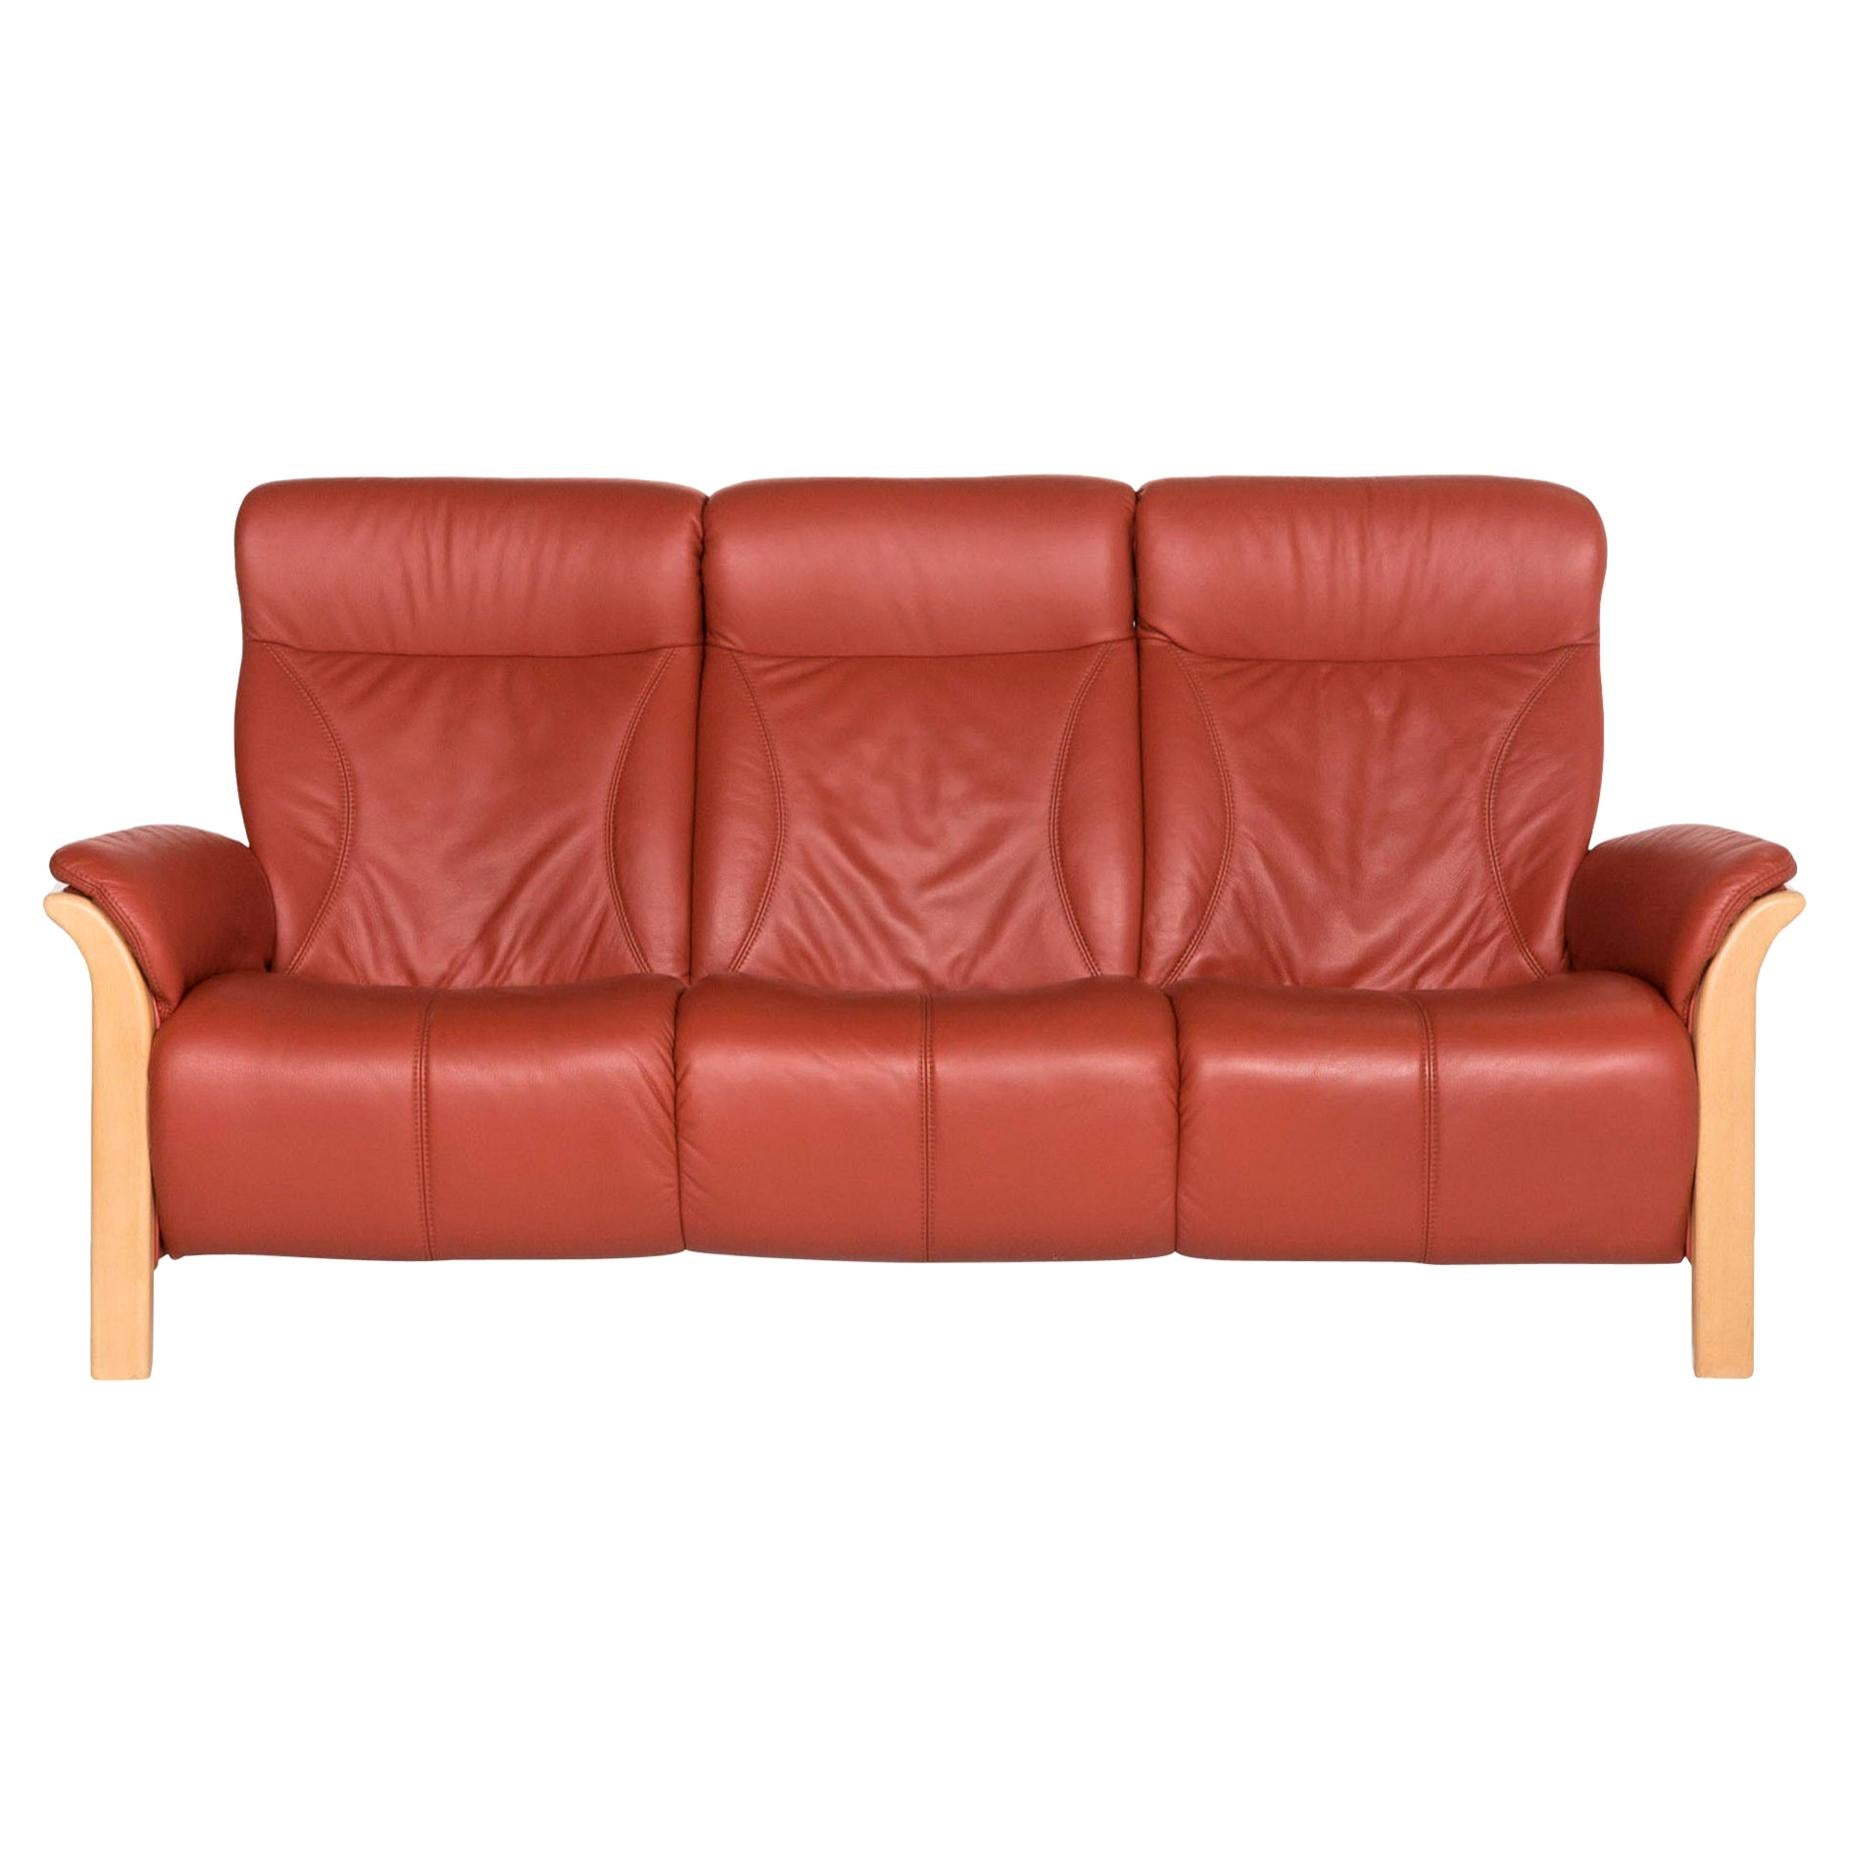 Himolla Windsor Leather Sofa Red Three-Seat Couch For Sale